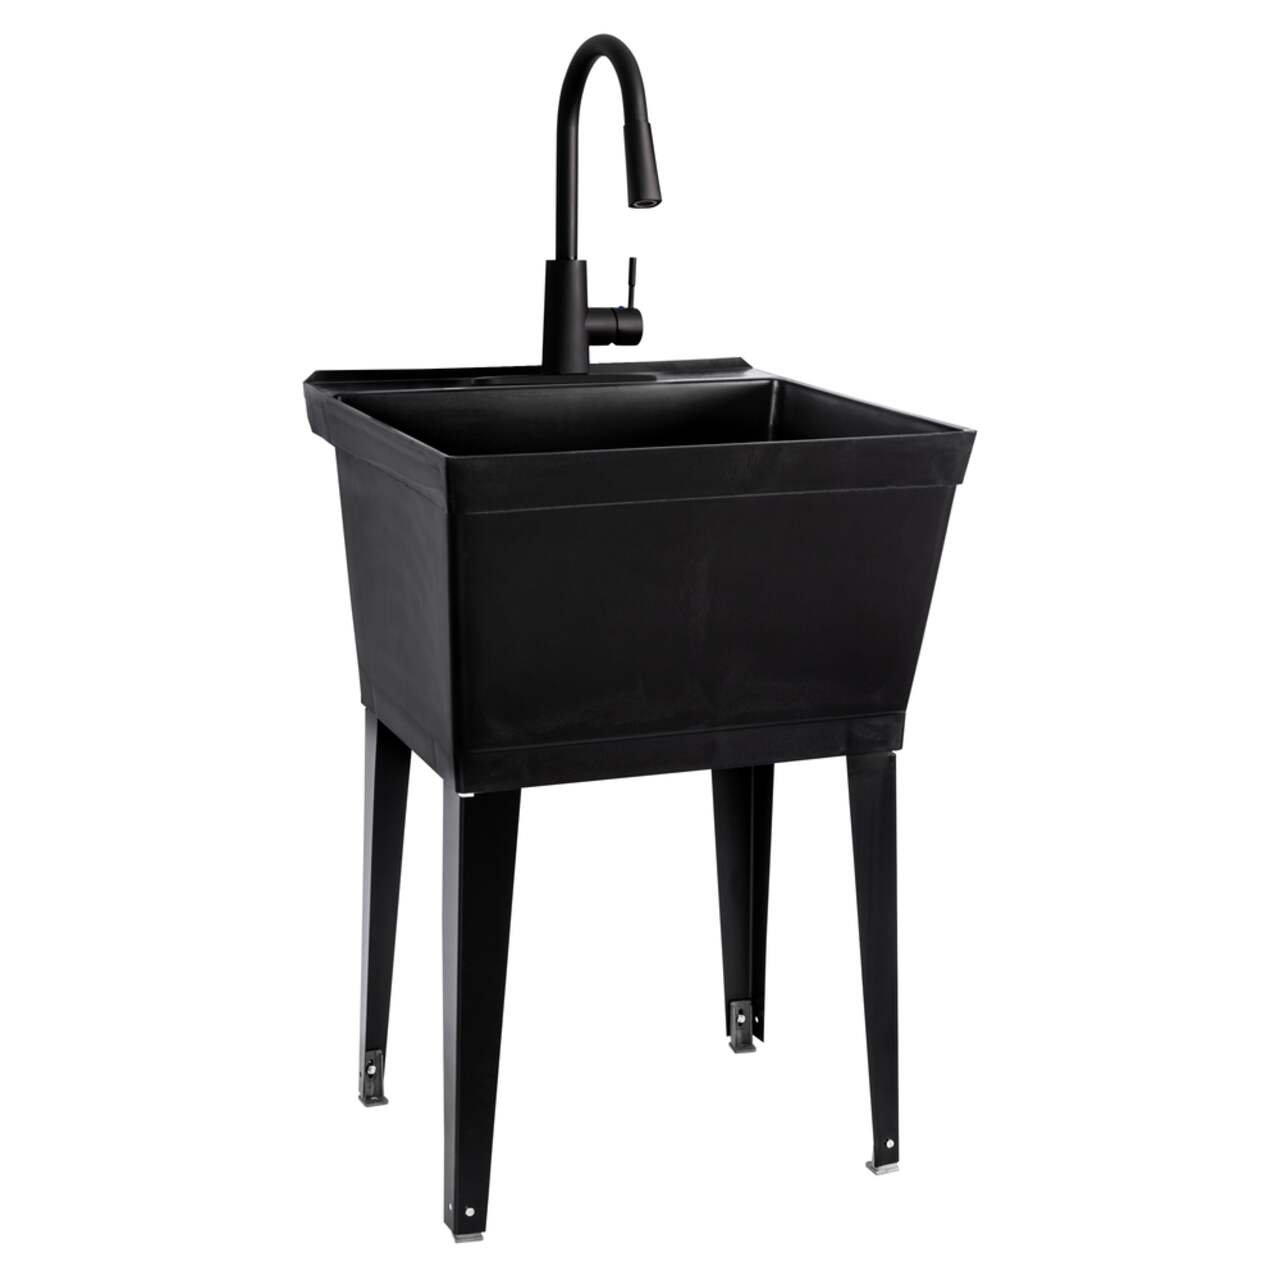 https://media-www.canadiantire.ca/product/fixing/plumbing/water-management/0634816/tehila-standard-black-laundry-tub-black-steel-legs-w-fct-36ad0cfd-143d-4072-92ac-a08241e5ce8c.png?imdensity=1&imwidth=640&impolicy=mZoom